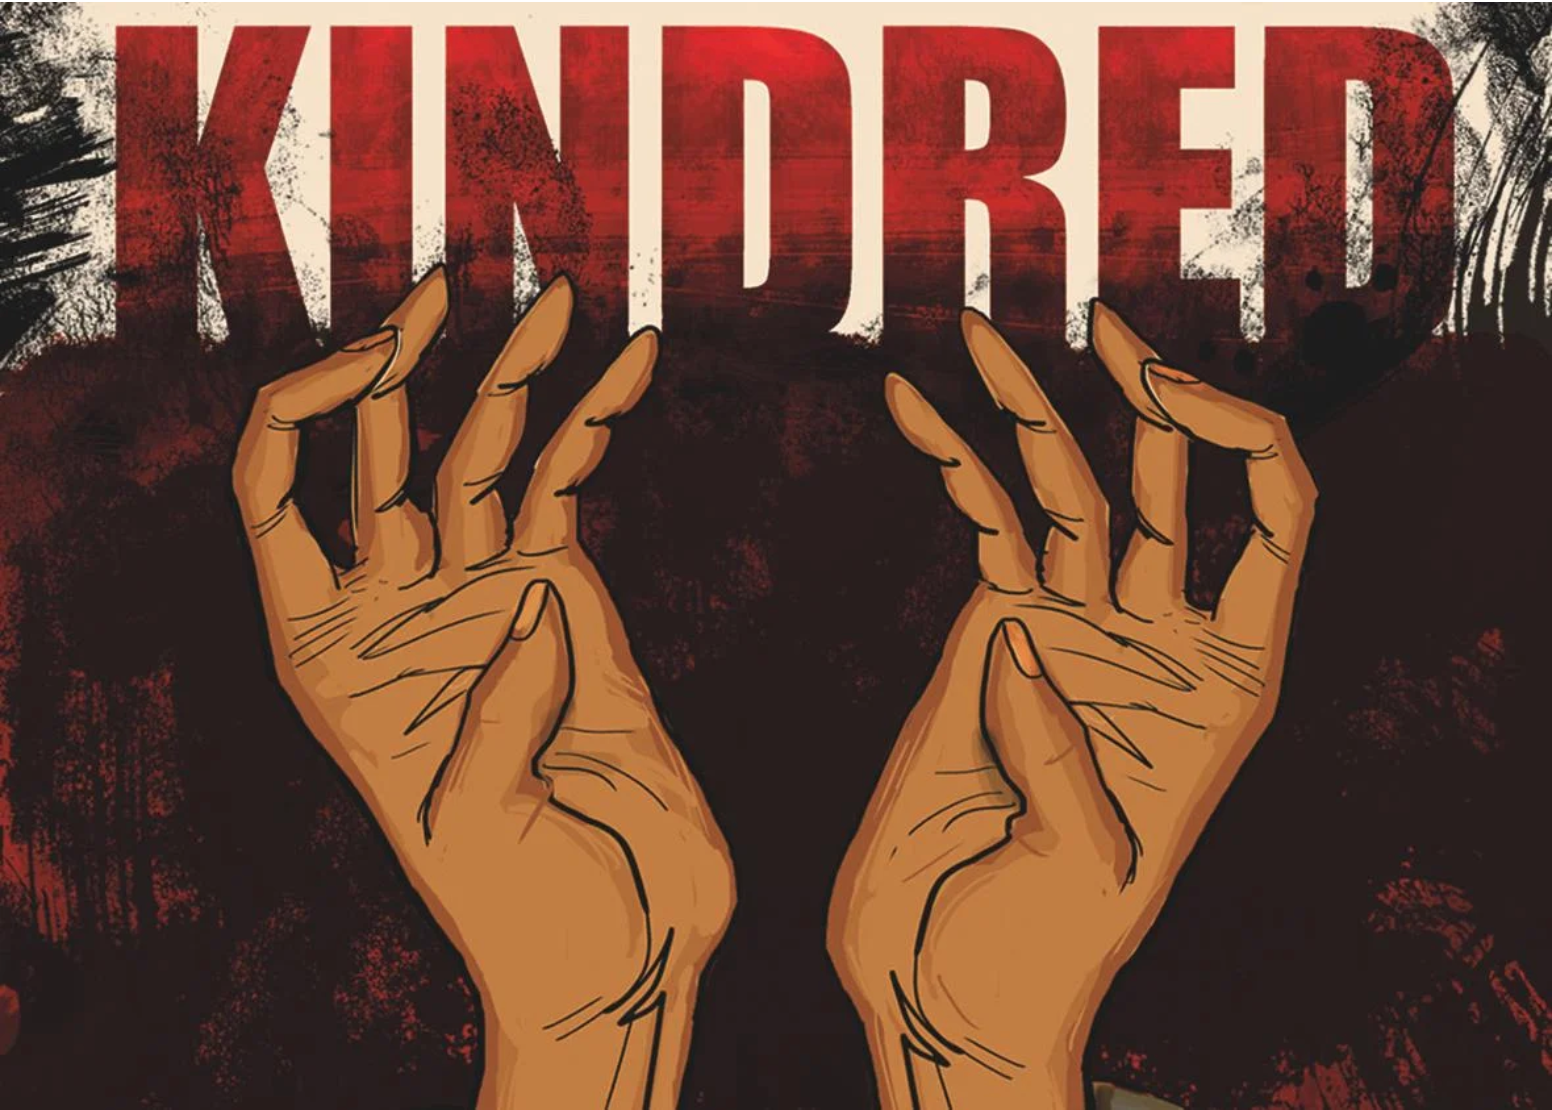 Image from the comic book adaptation of Octavia Butler's "Kindred." A pair of light brown hands, handcuffed wrists out of the frame, are tense below the word "Kindred" in red, block-lettered text. 